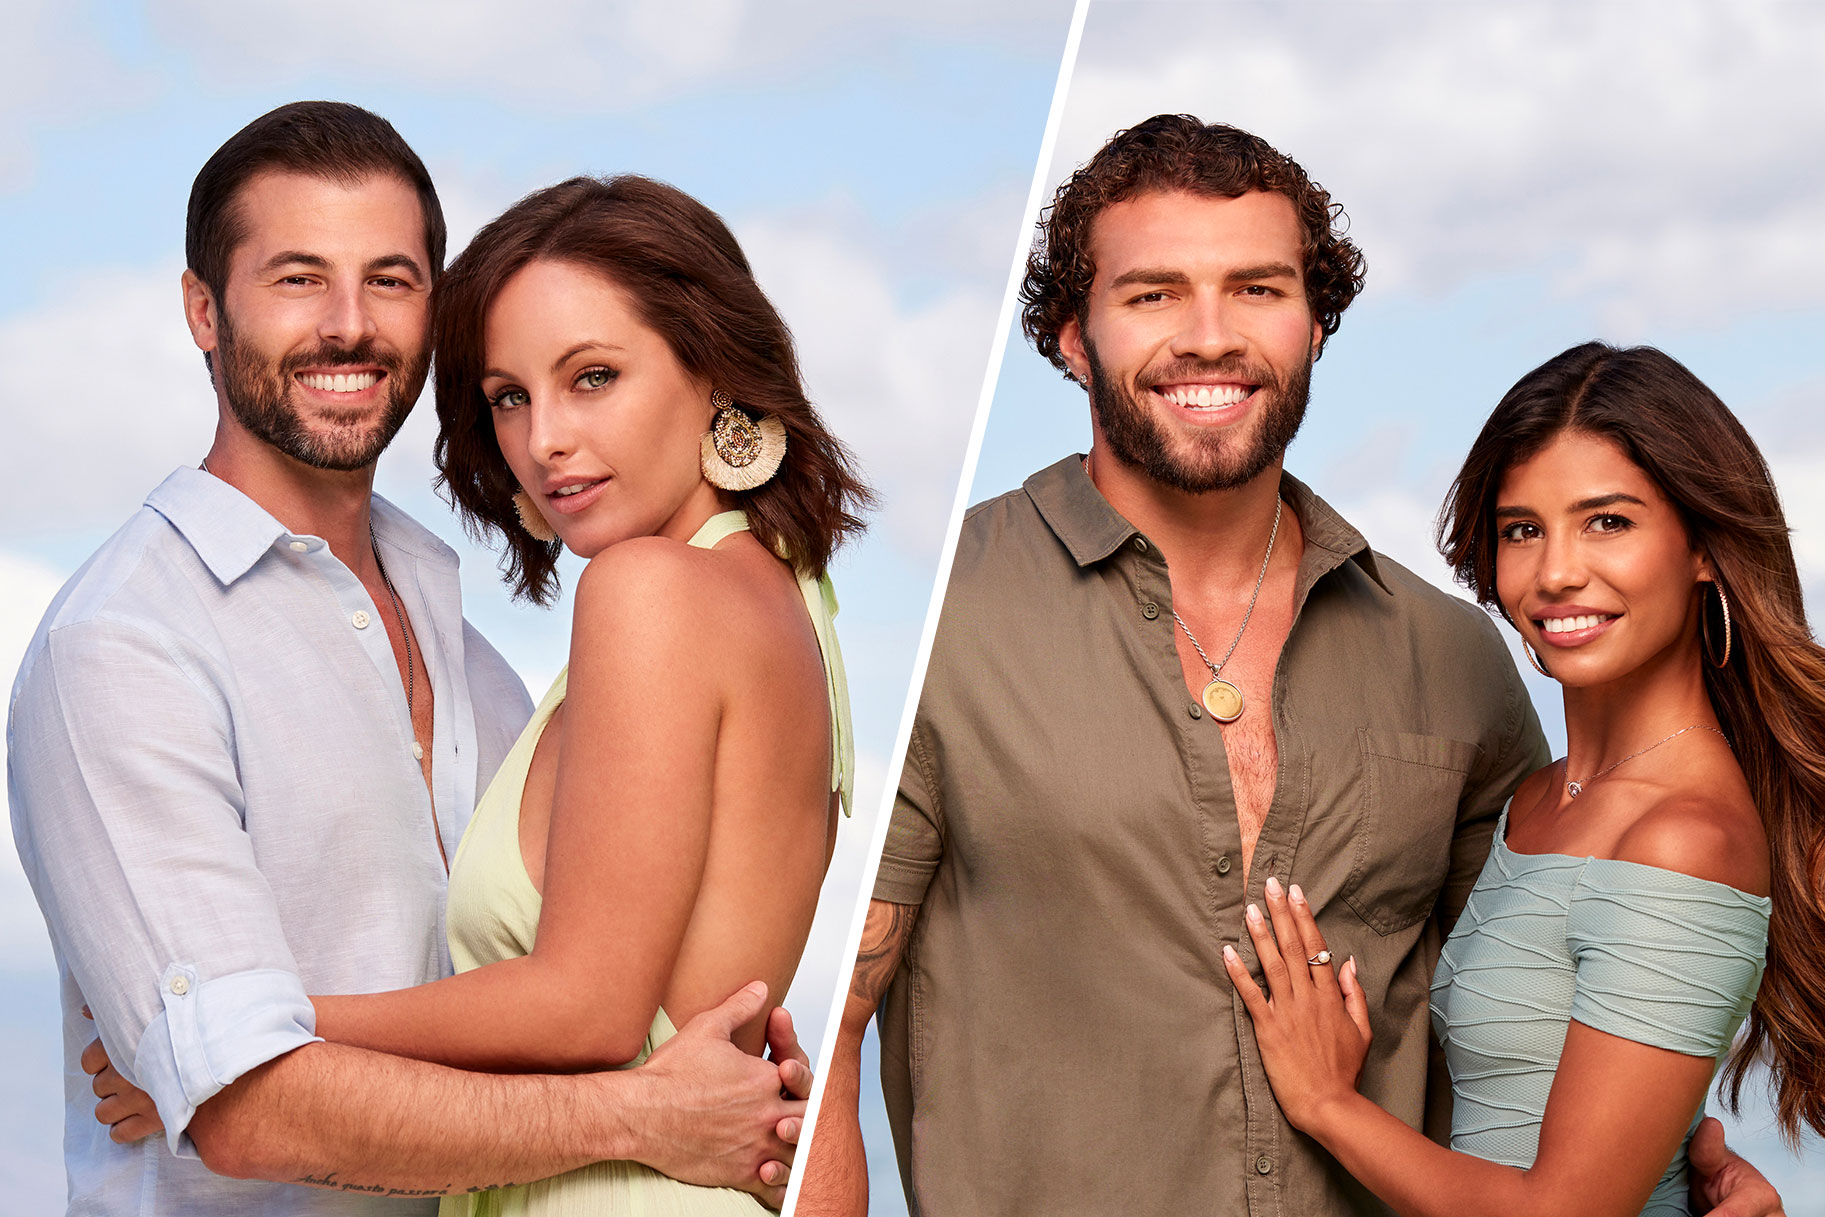 Two couples from Temptation Island